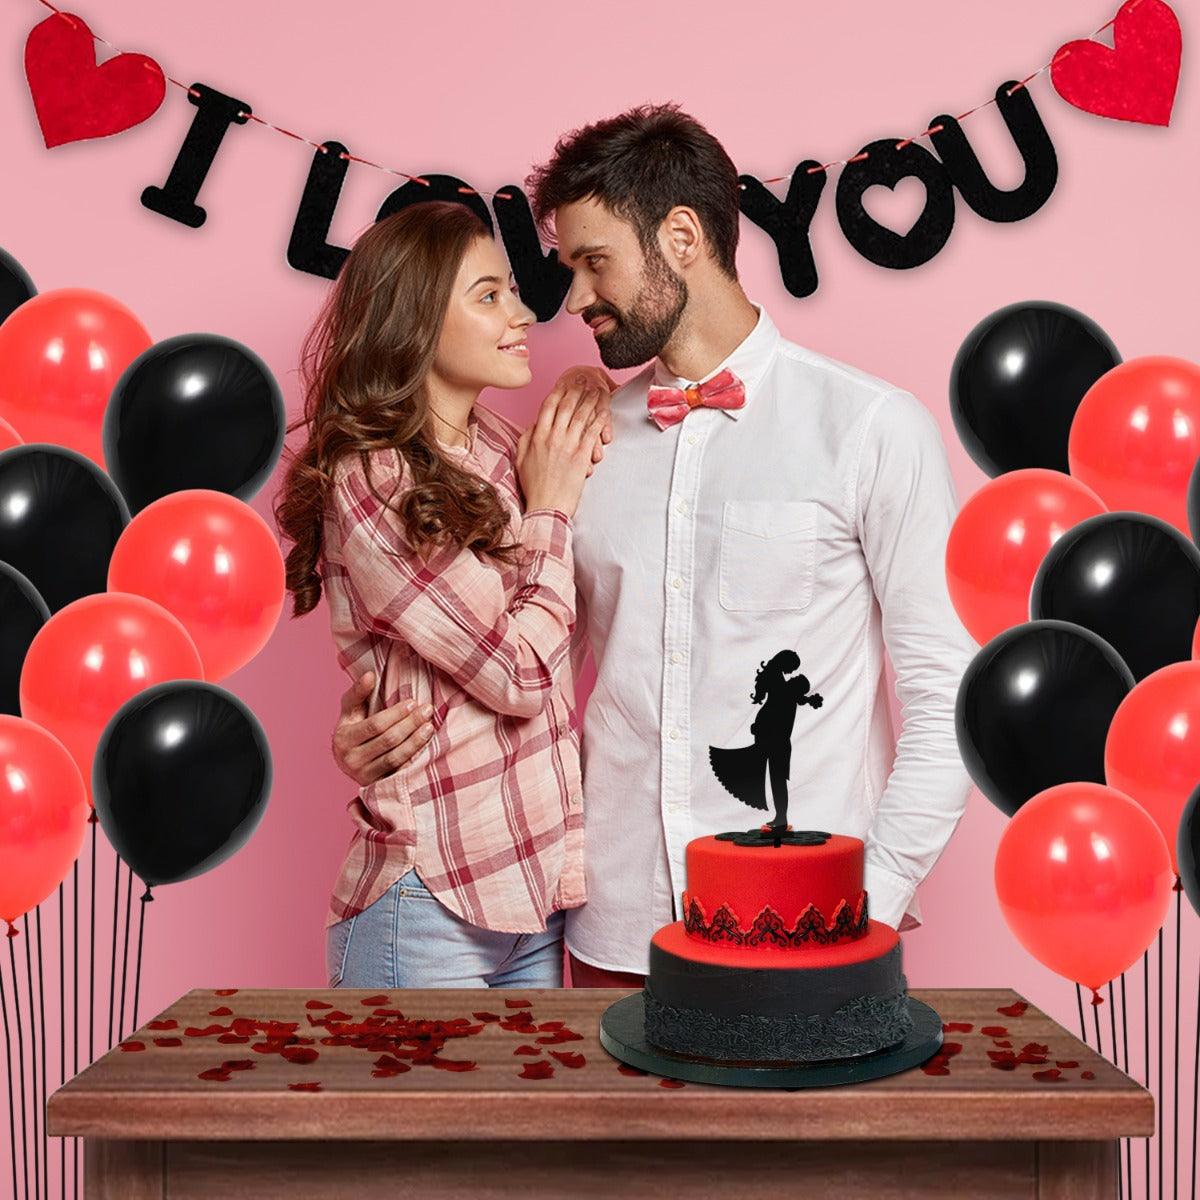 PartyCorp Valentines, Anniversary, Heart Decoration Kit Combo 27 Pcs - Red & Black Latex Balloon, I Love You Banner, Couple Love Cake Topper